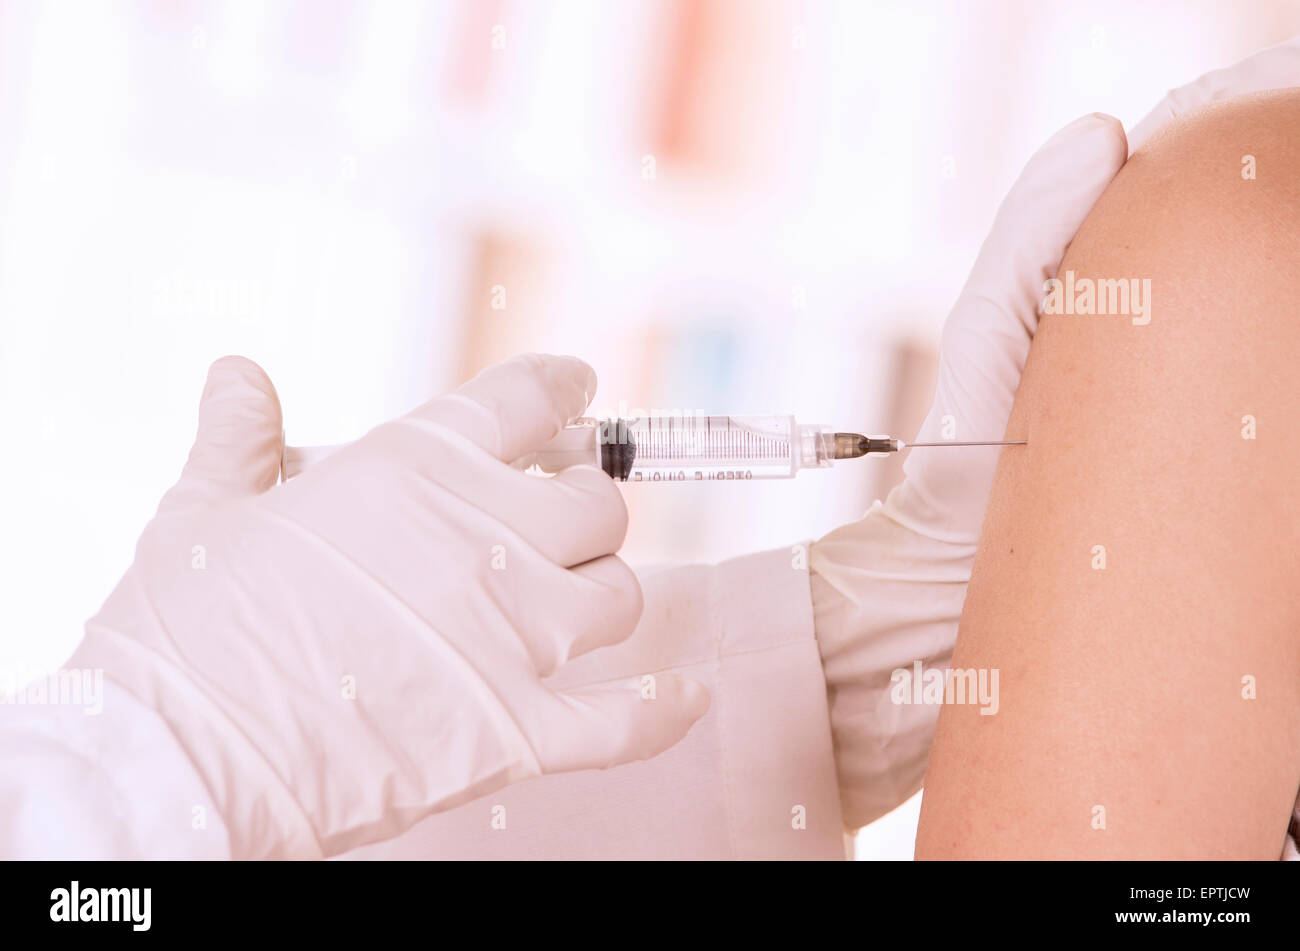 closeup of doctor's hand with injection holding patients shoulder Stock Photo